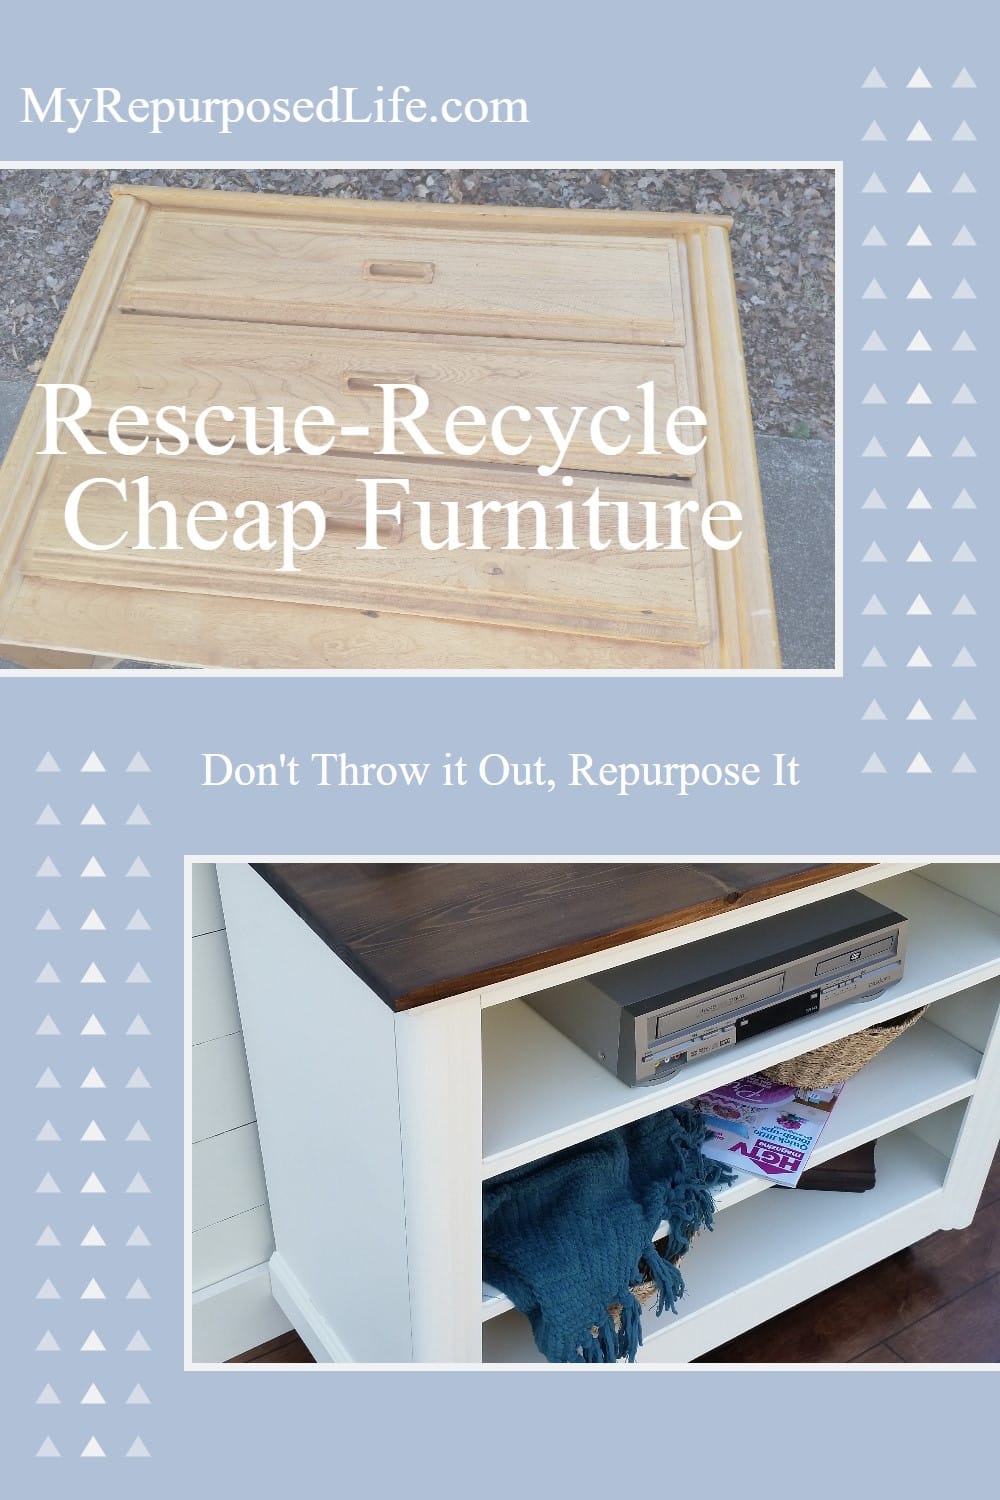 Our step-by-step directions show you how to make a TV stand from an old dresser. Small changes make a big impact. Great weekend project. via @repurposedlife